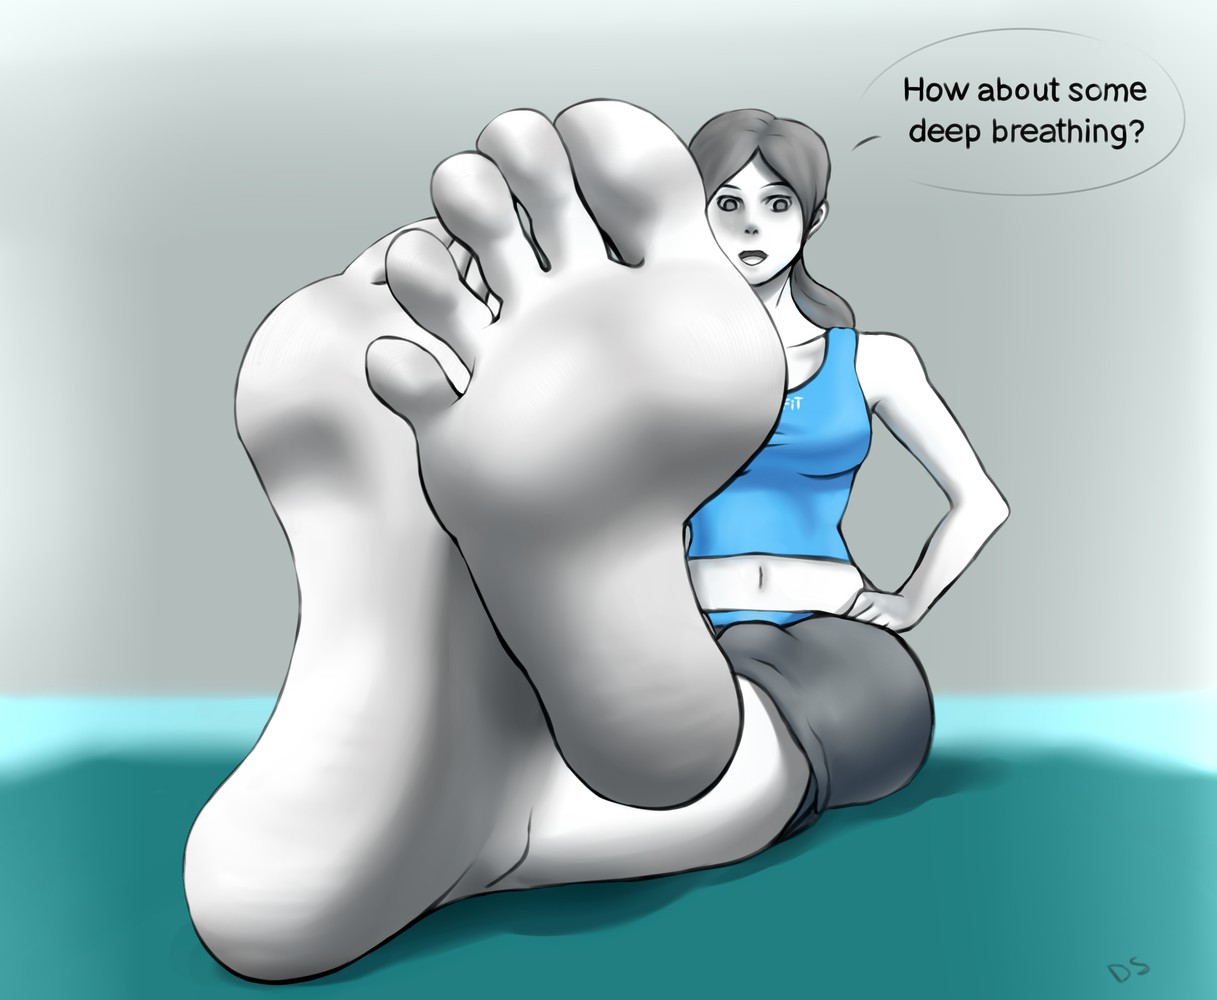 Wii Fit Trainer's Stinky Feet.